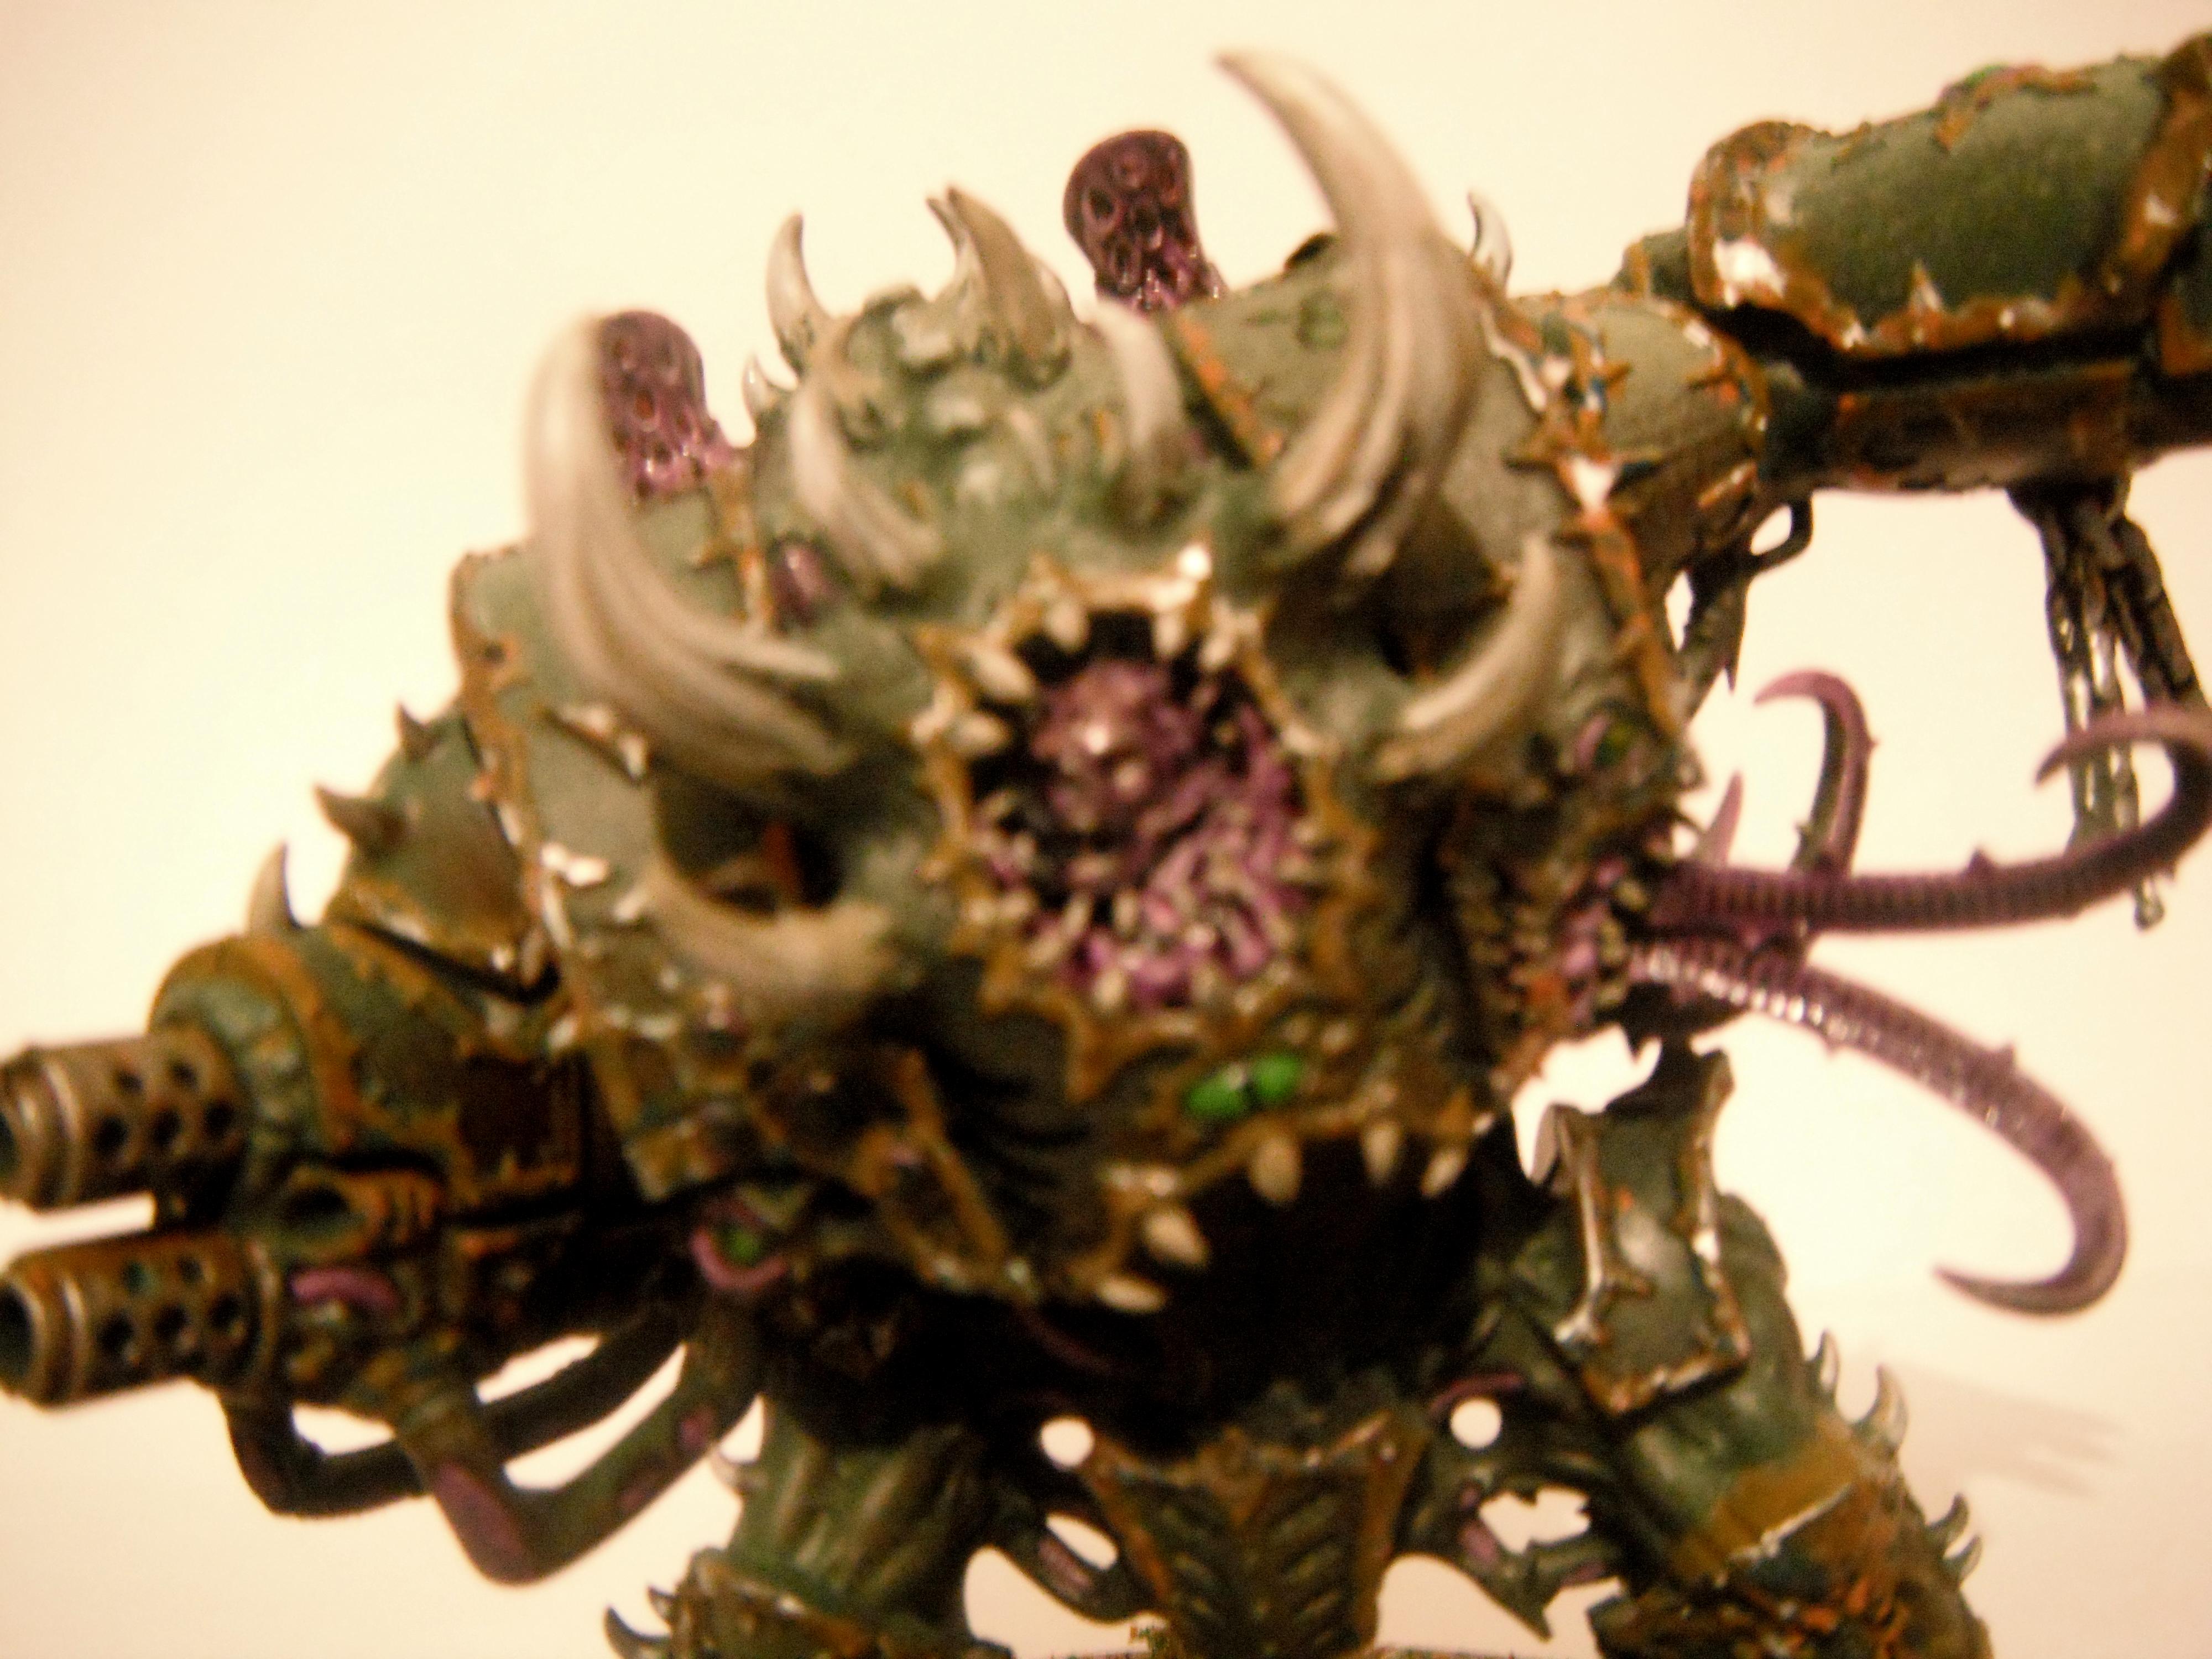 Brute, Chaos, Hell, Nurgle, Space, Space Marines, Warhammer 40,000